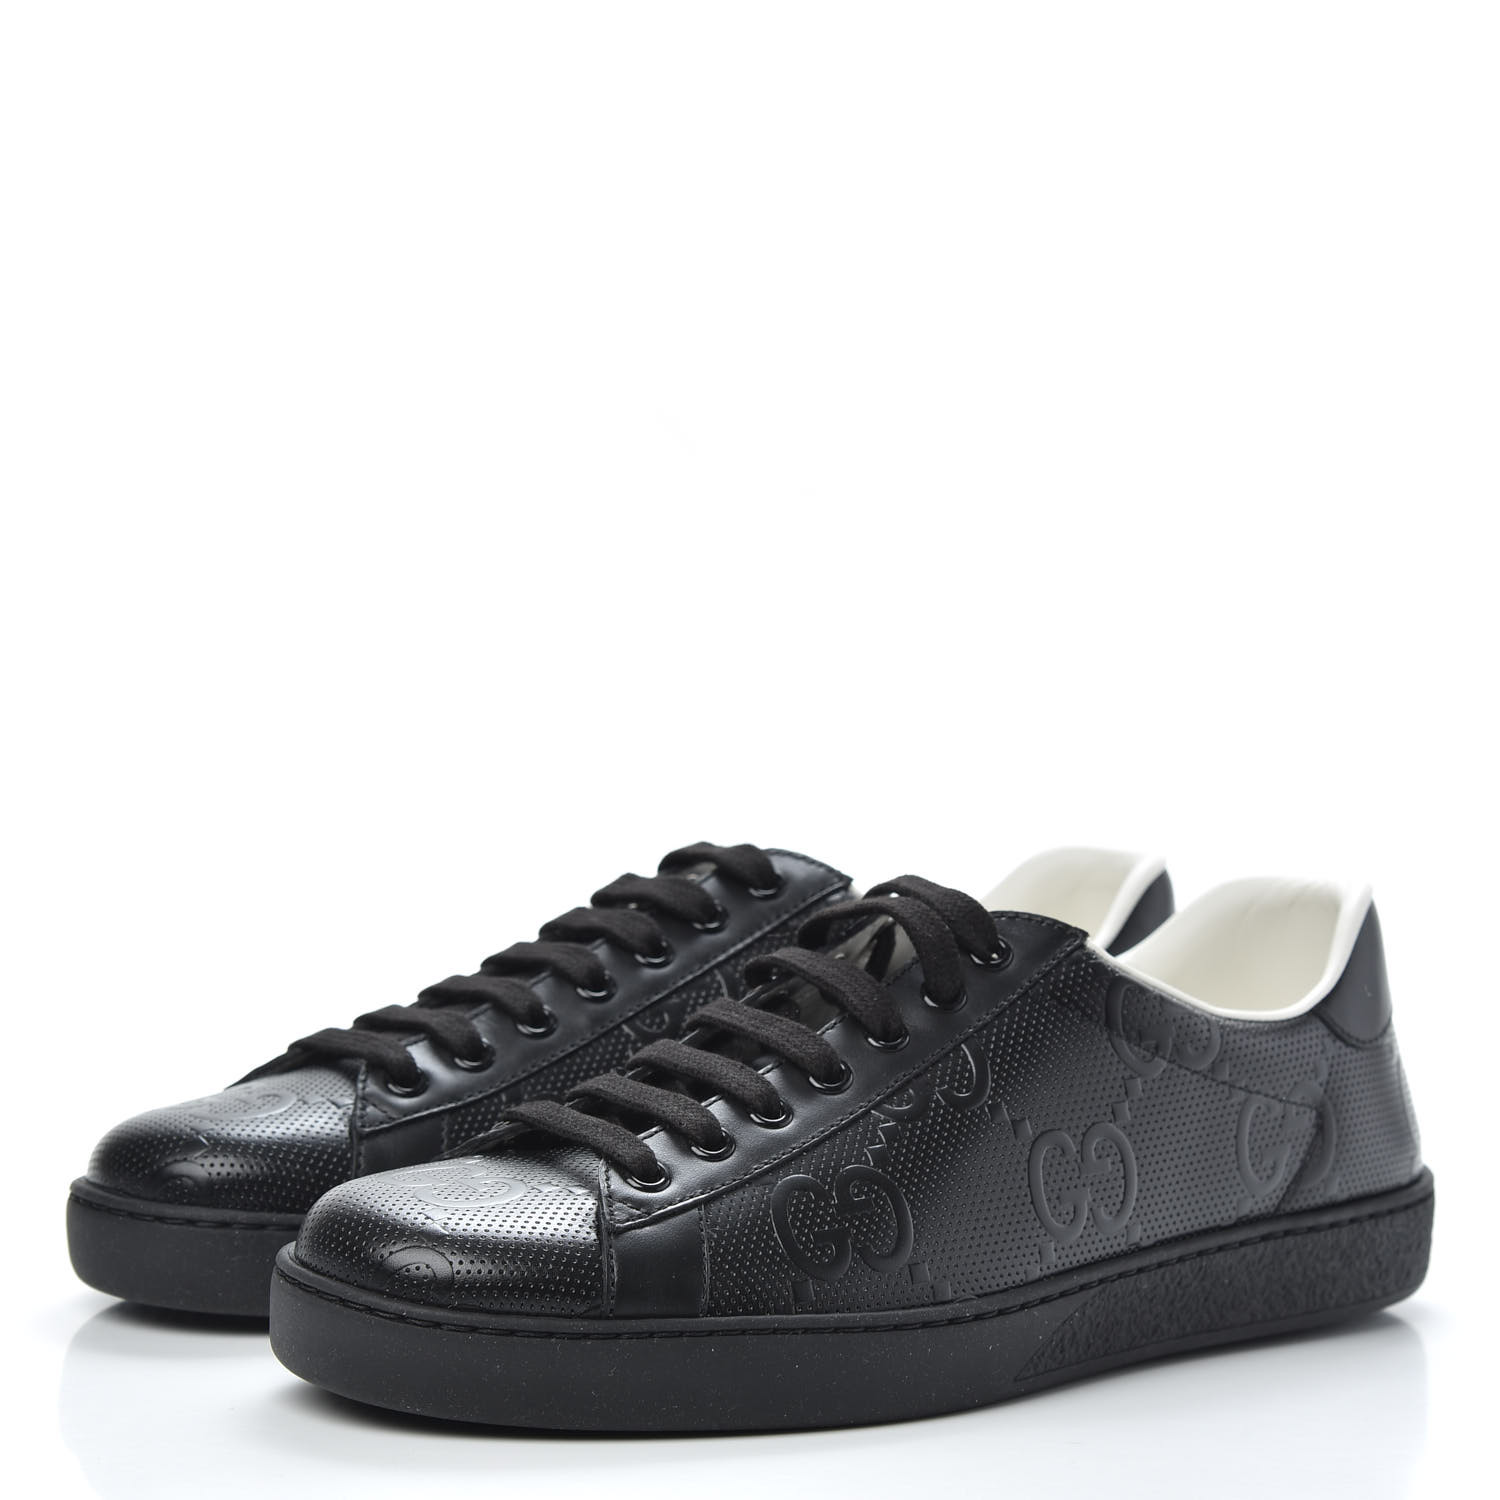 GUCCI Calfskin GG Embossed Mens Ace Sneakers 6 Black 721459 | FASHIONPHILE